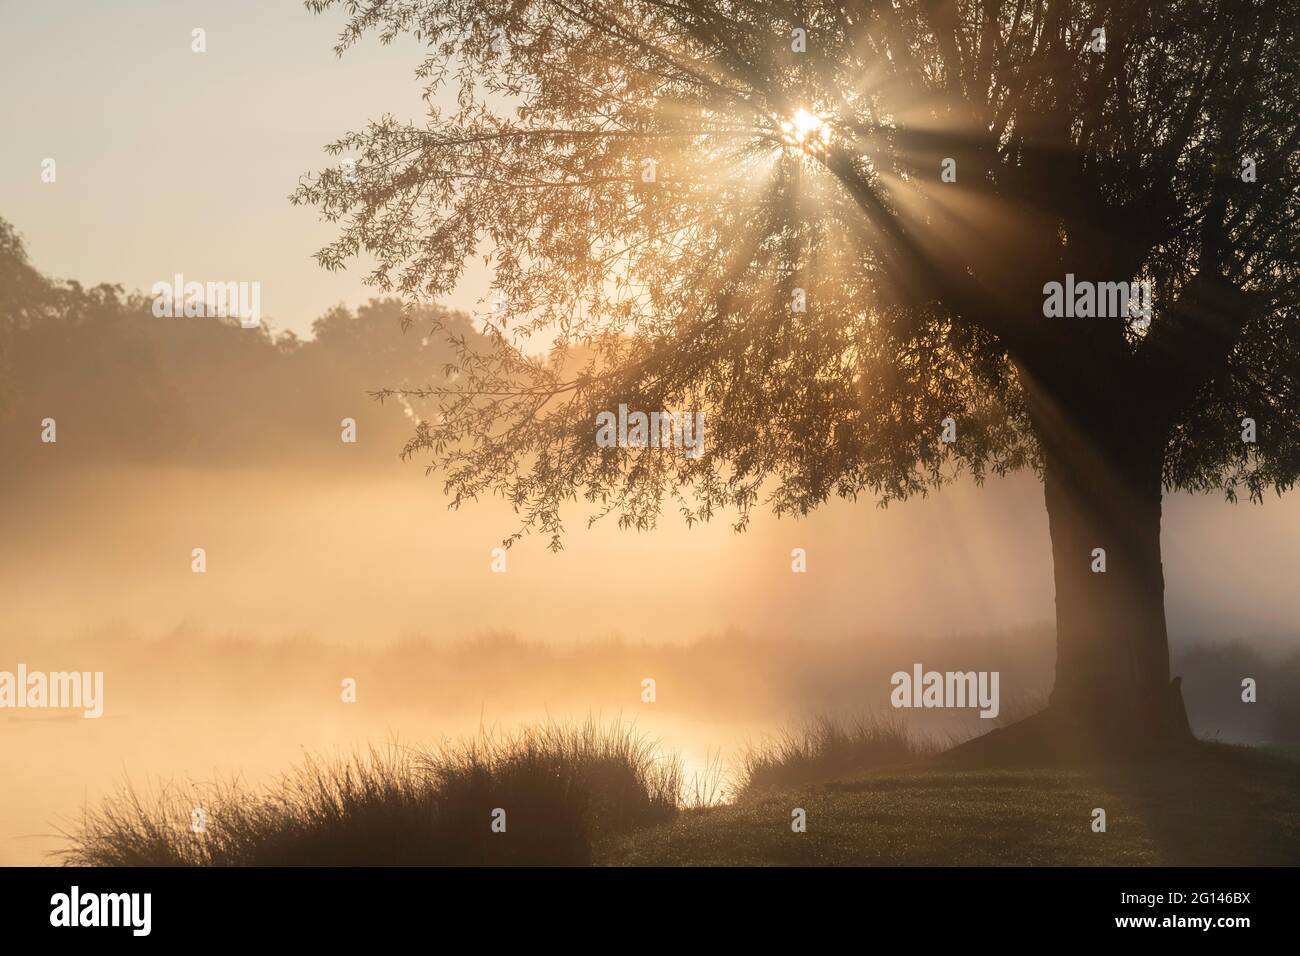 The early morning sun bursts through a silhouetted tree by a mist covered pond Stock Photo